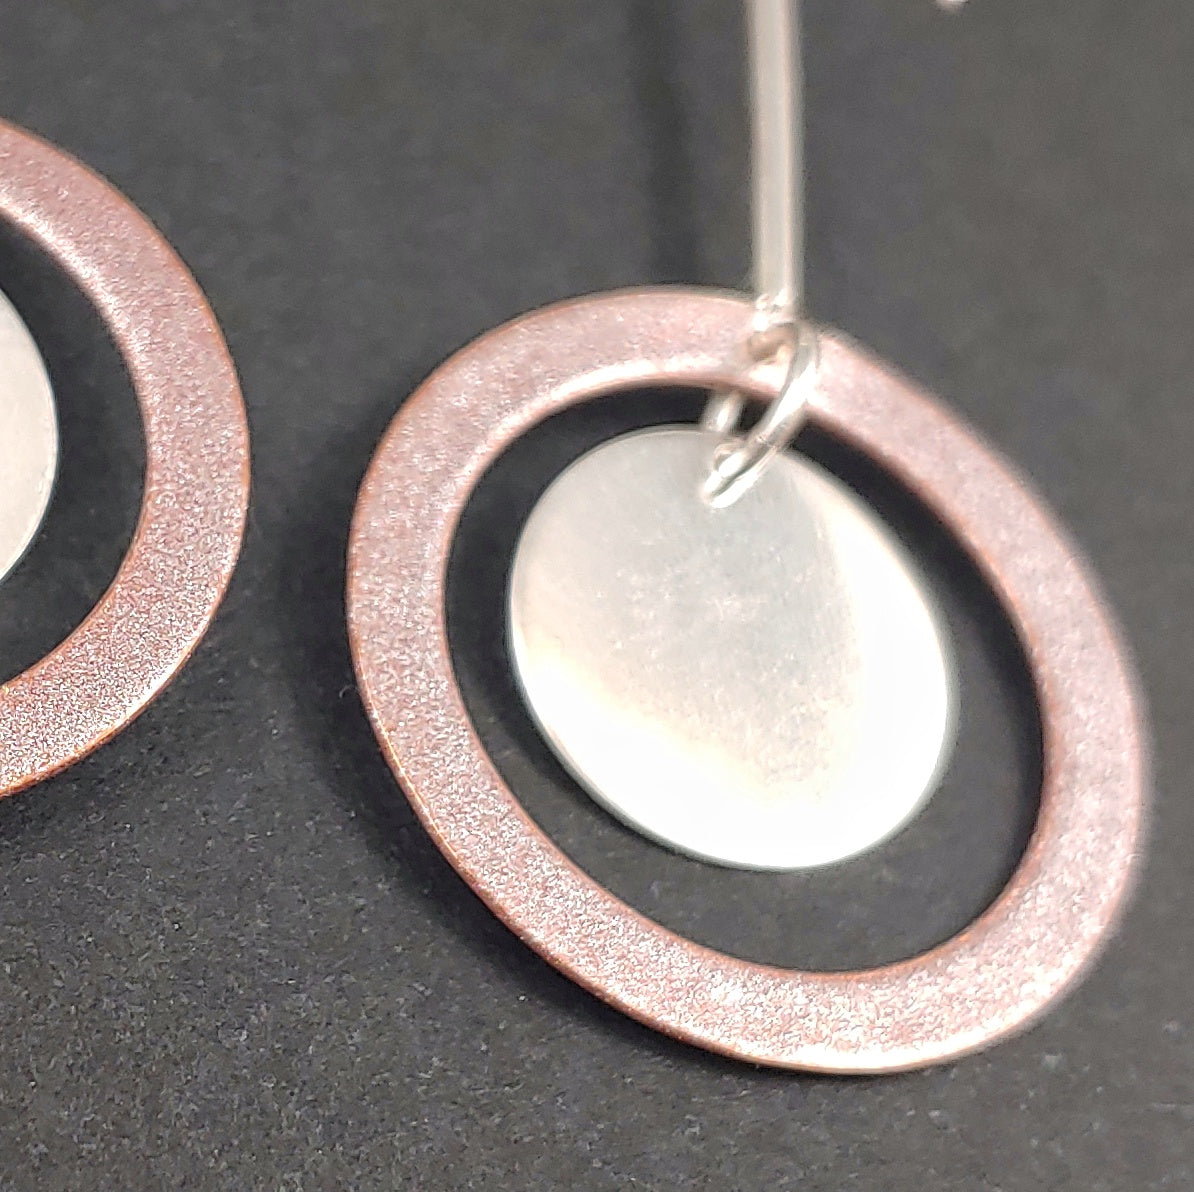 The Double Round Earrings - Rose Gold and Silver